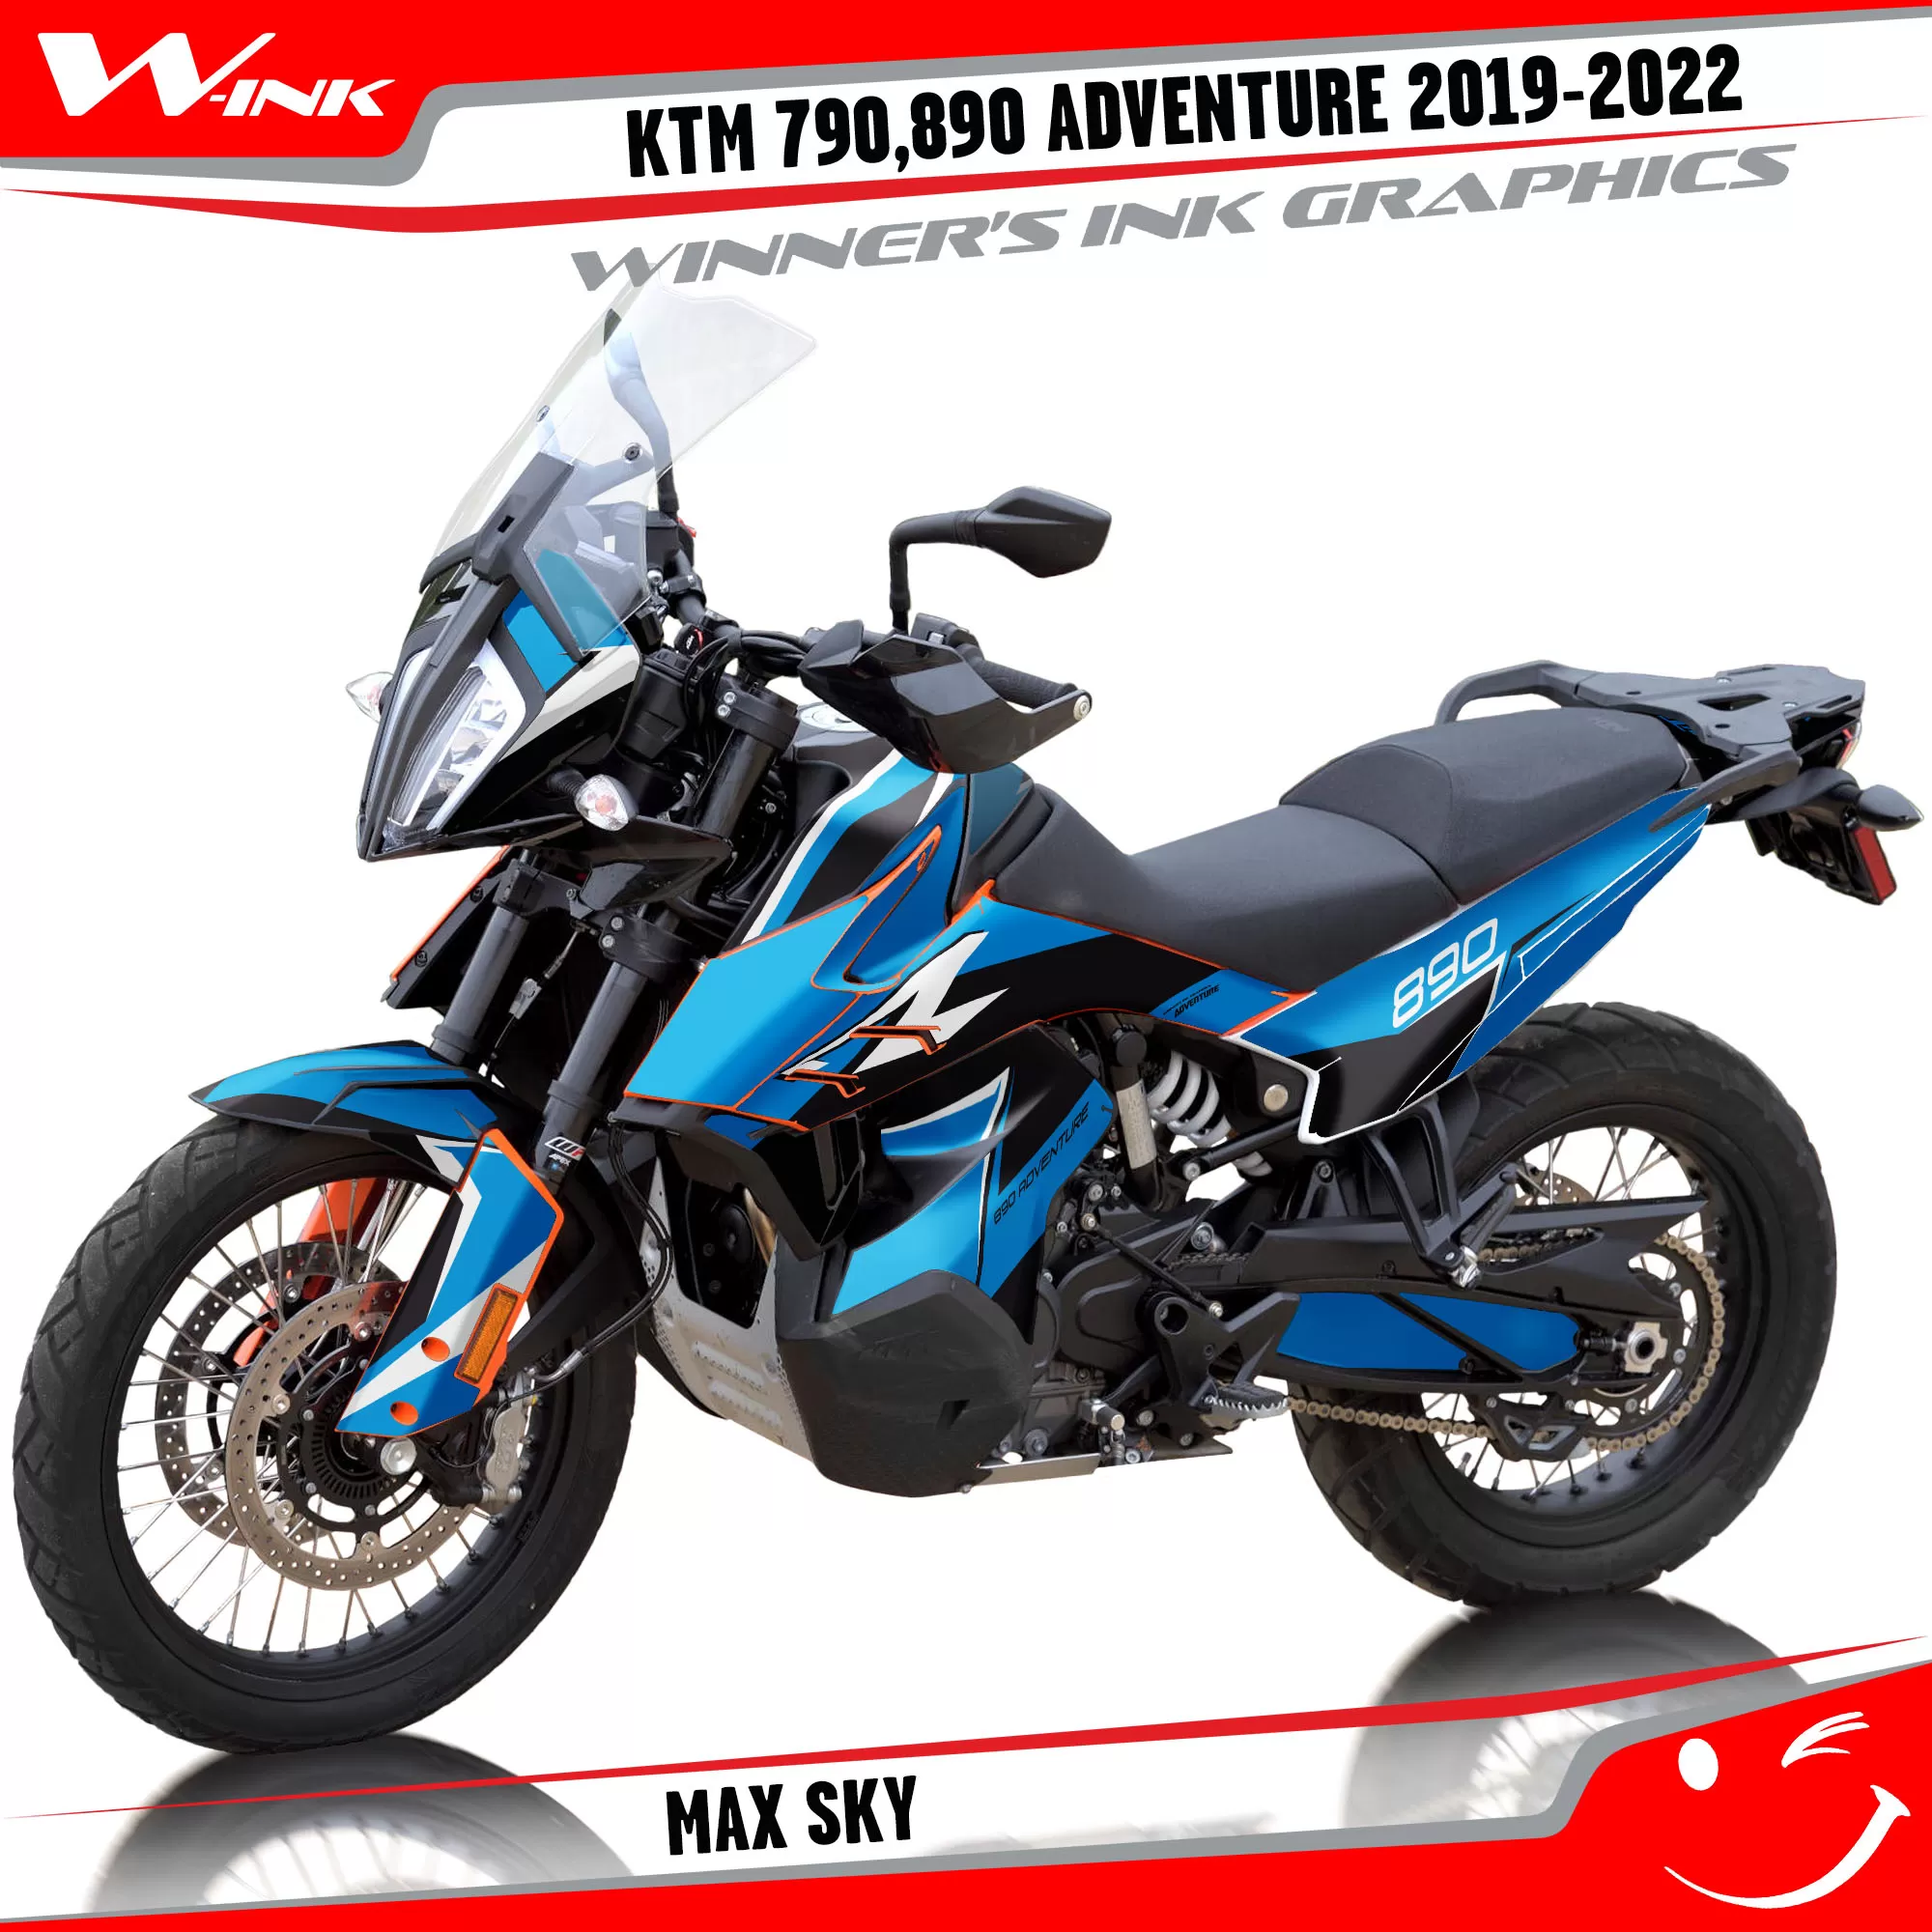 Adventure-790-890-2019-2020-2021-2022-graphics-kit-and-decals-with-designs-Max-Sky